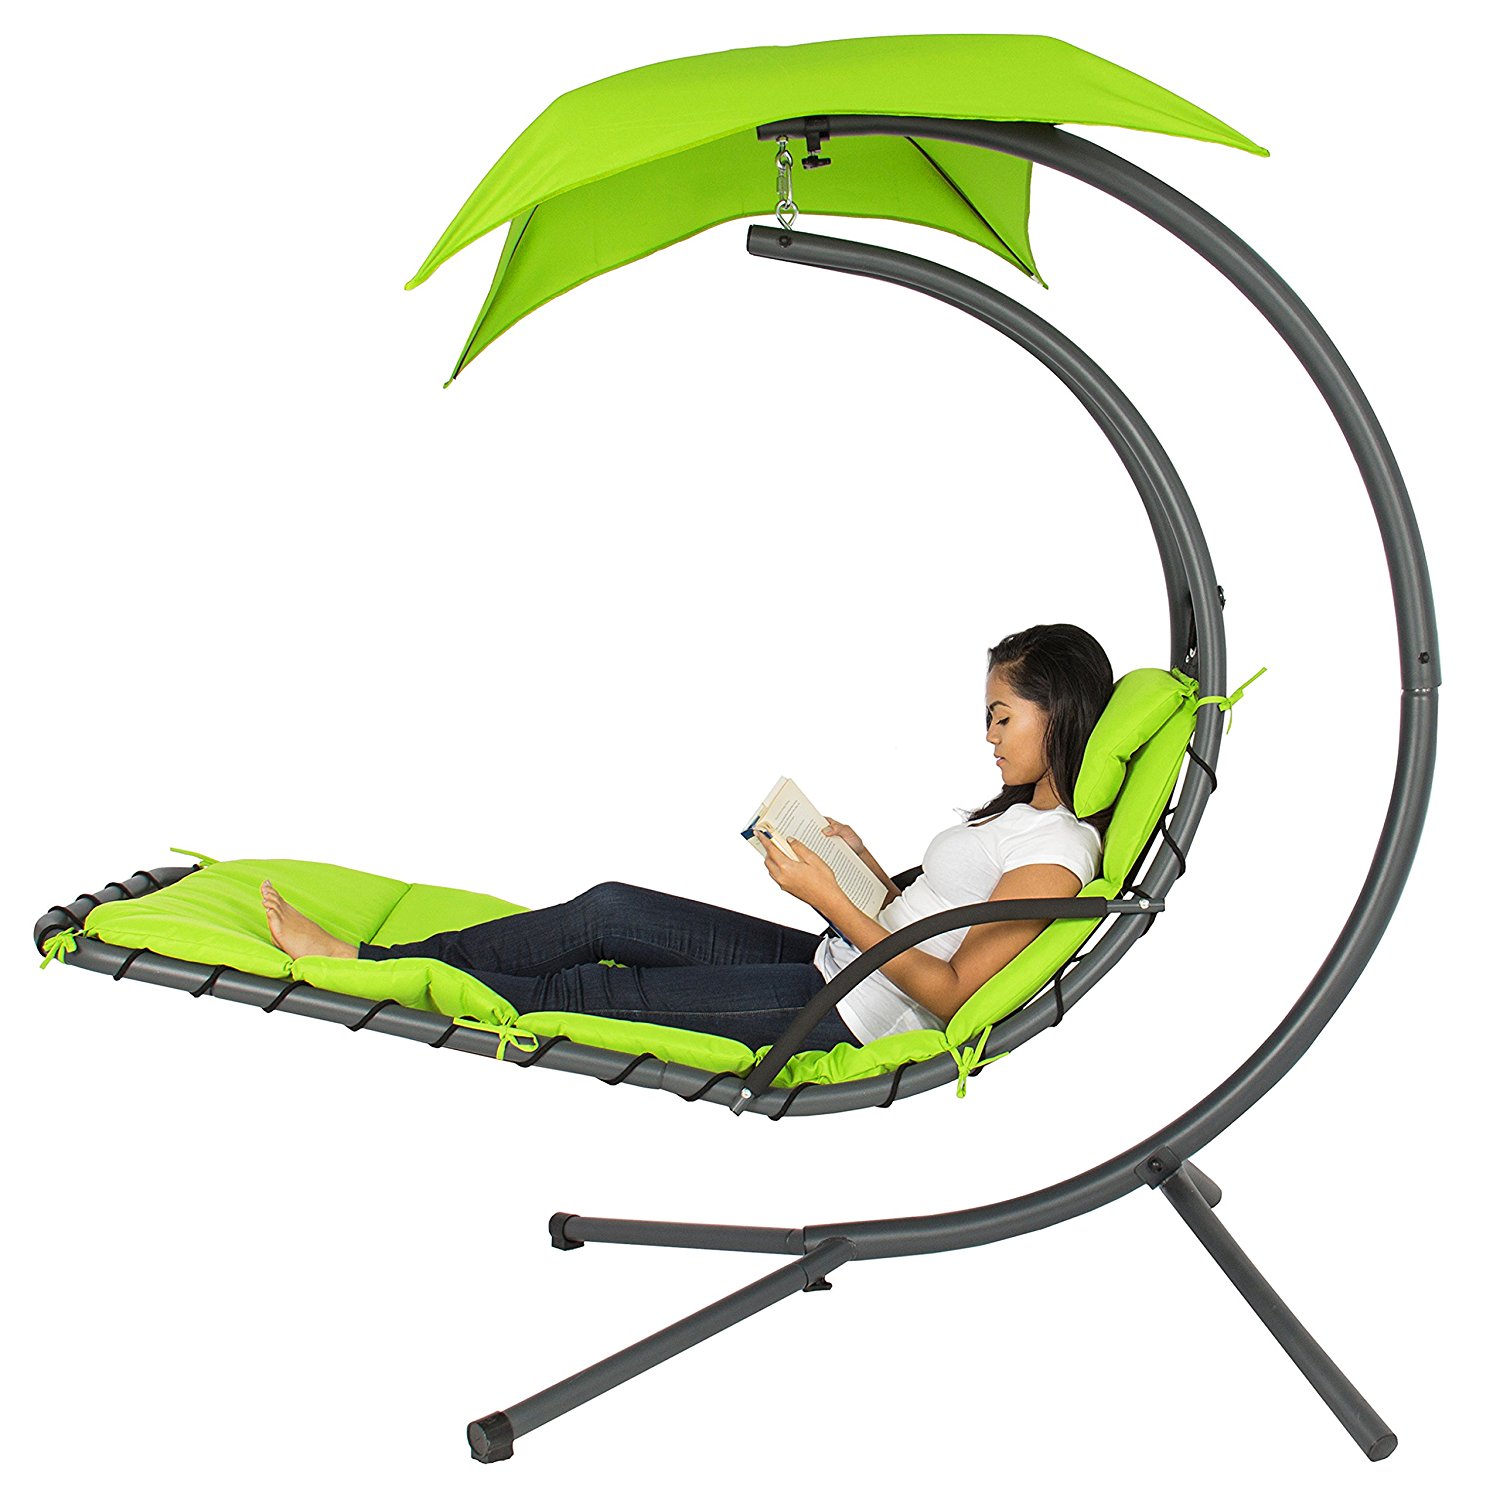 Hanging chaise lounger chair arc stand air porch swing for $125